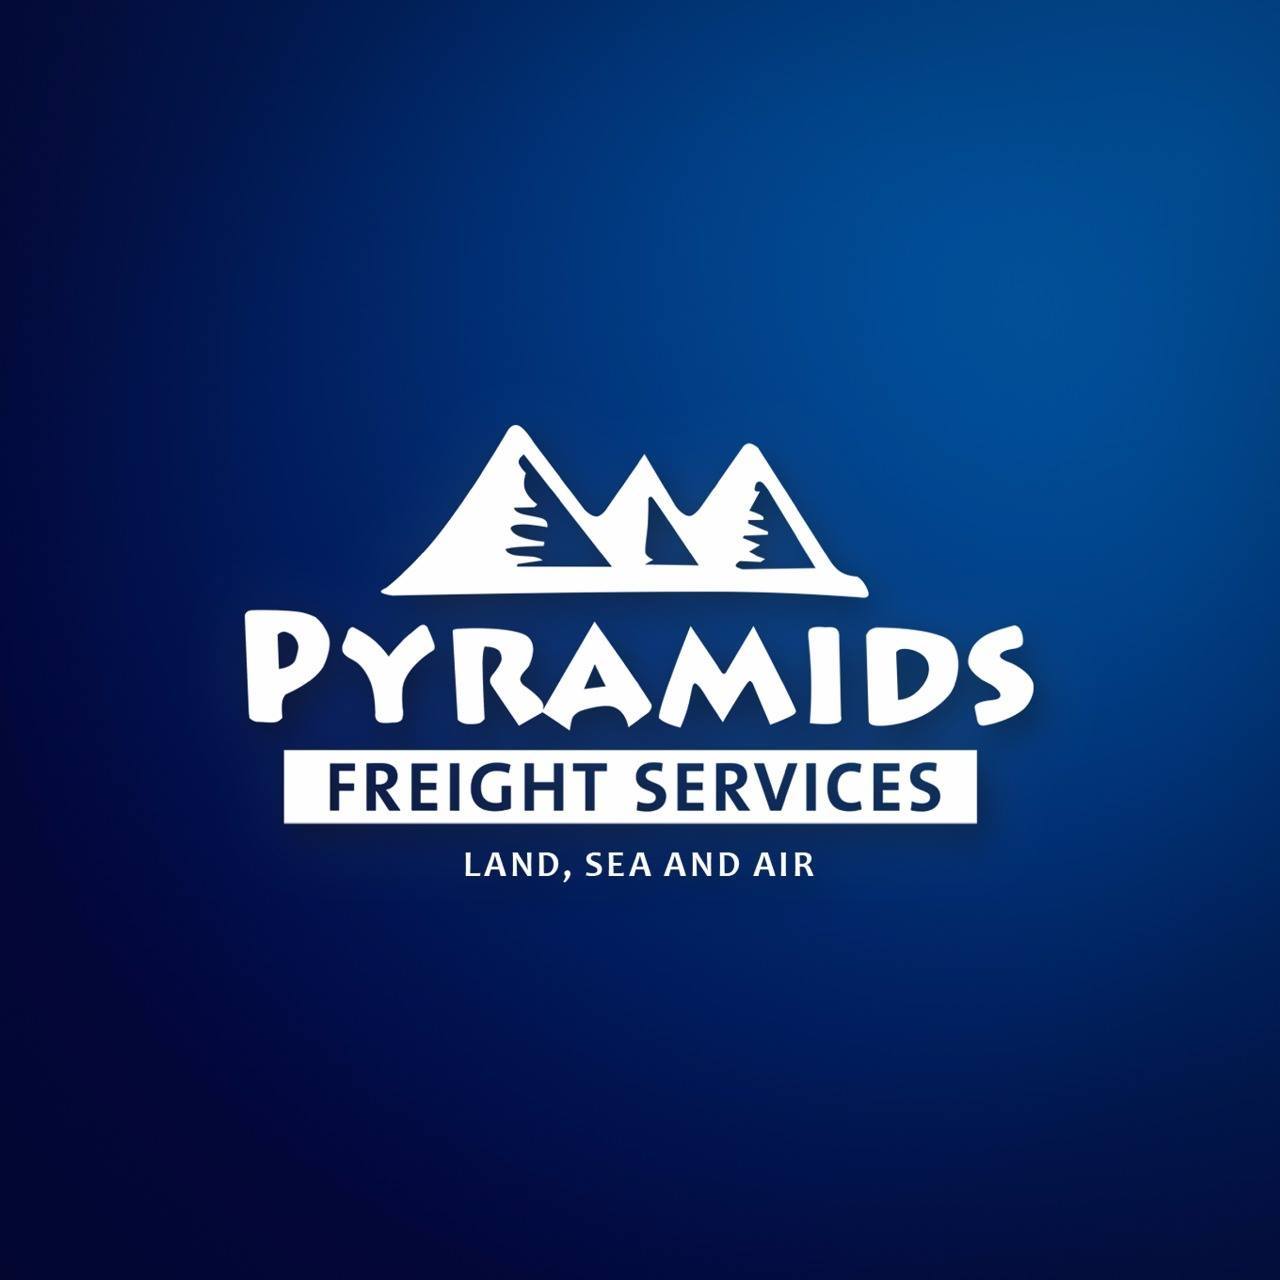 Pyramids Freight Services Group